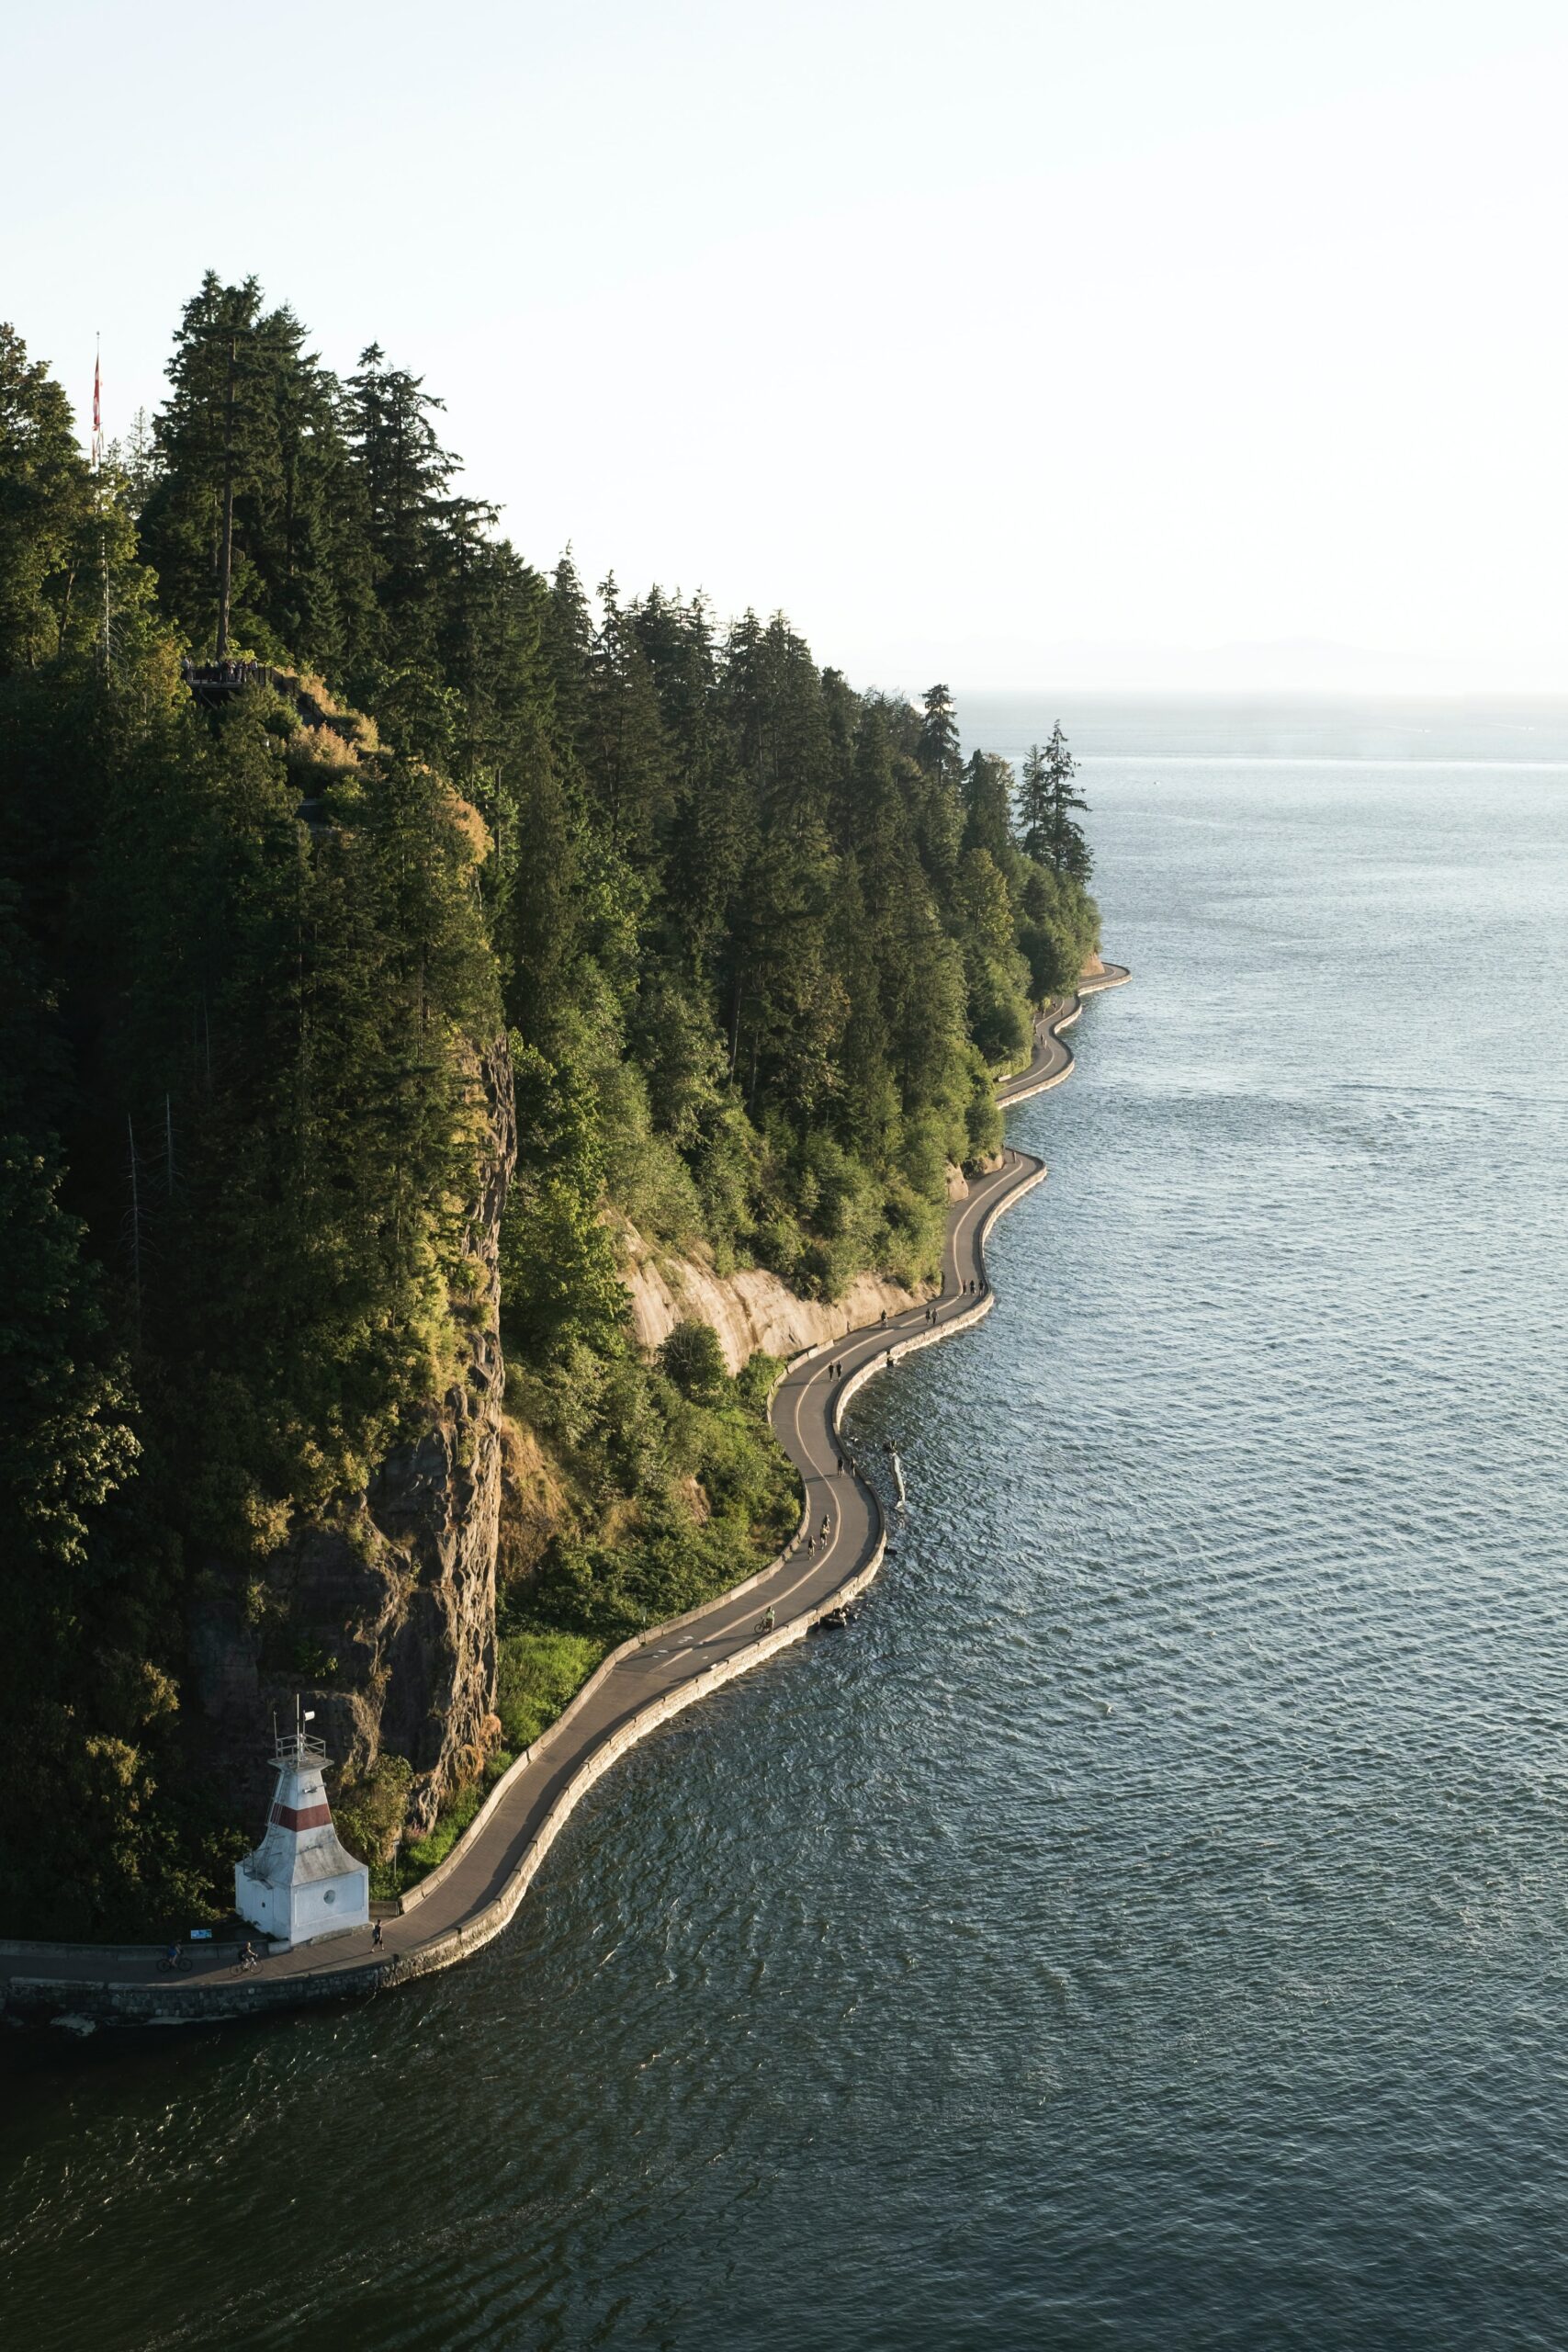 A photo of the Stanley Park seawall. A pedestrian path separates the image into ocean and forest, and a small lighthouse is anchored in the foreground. The sky is slightly overcast, and almost blends into the sea.